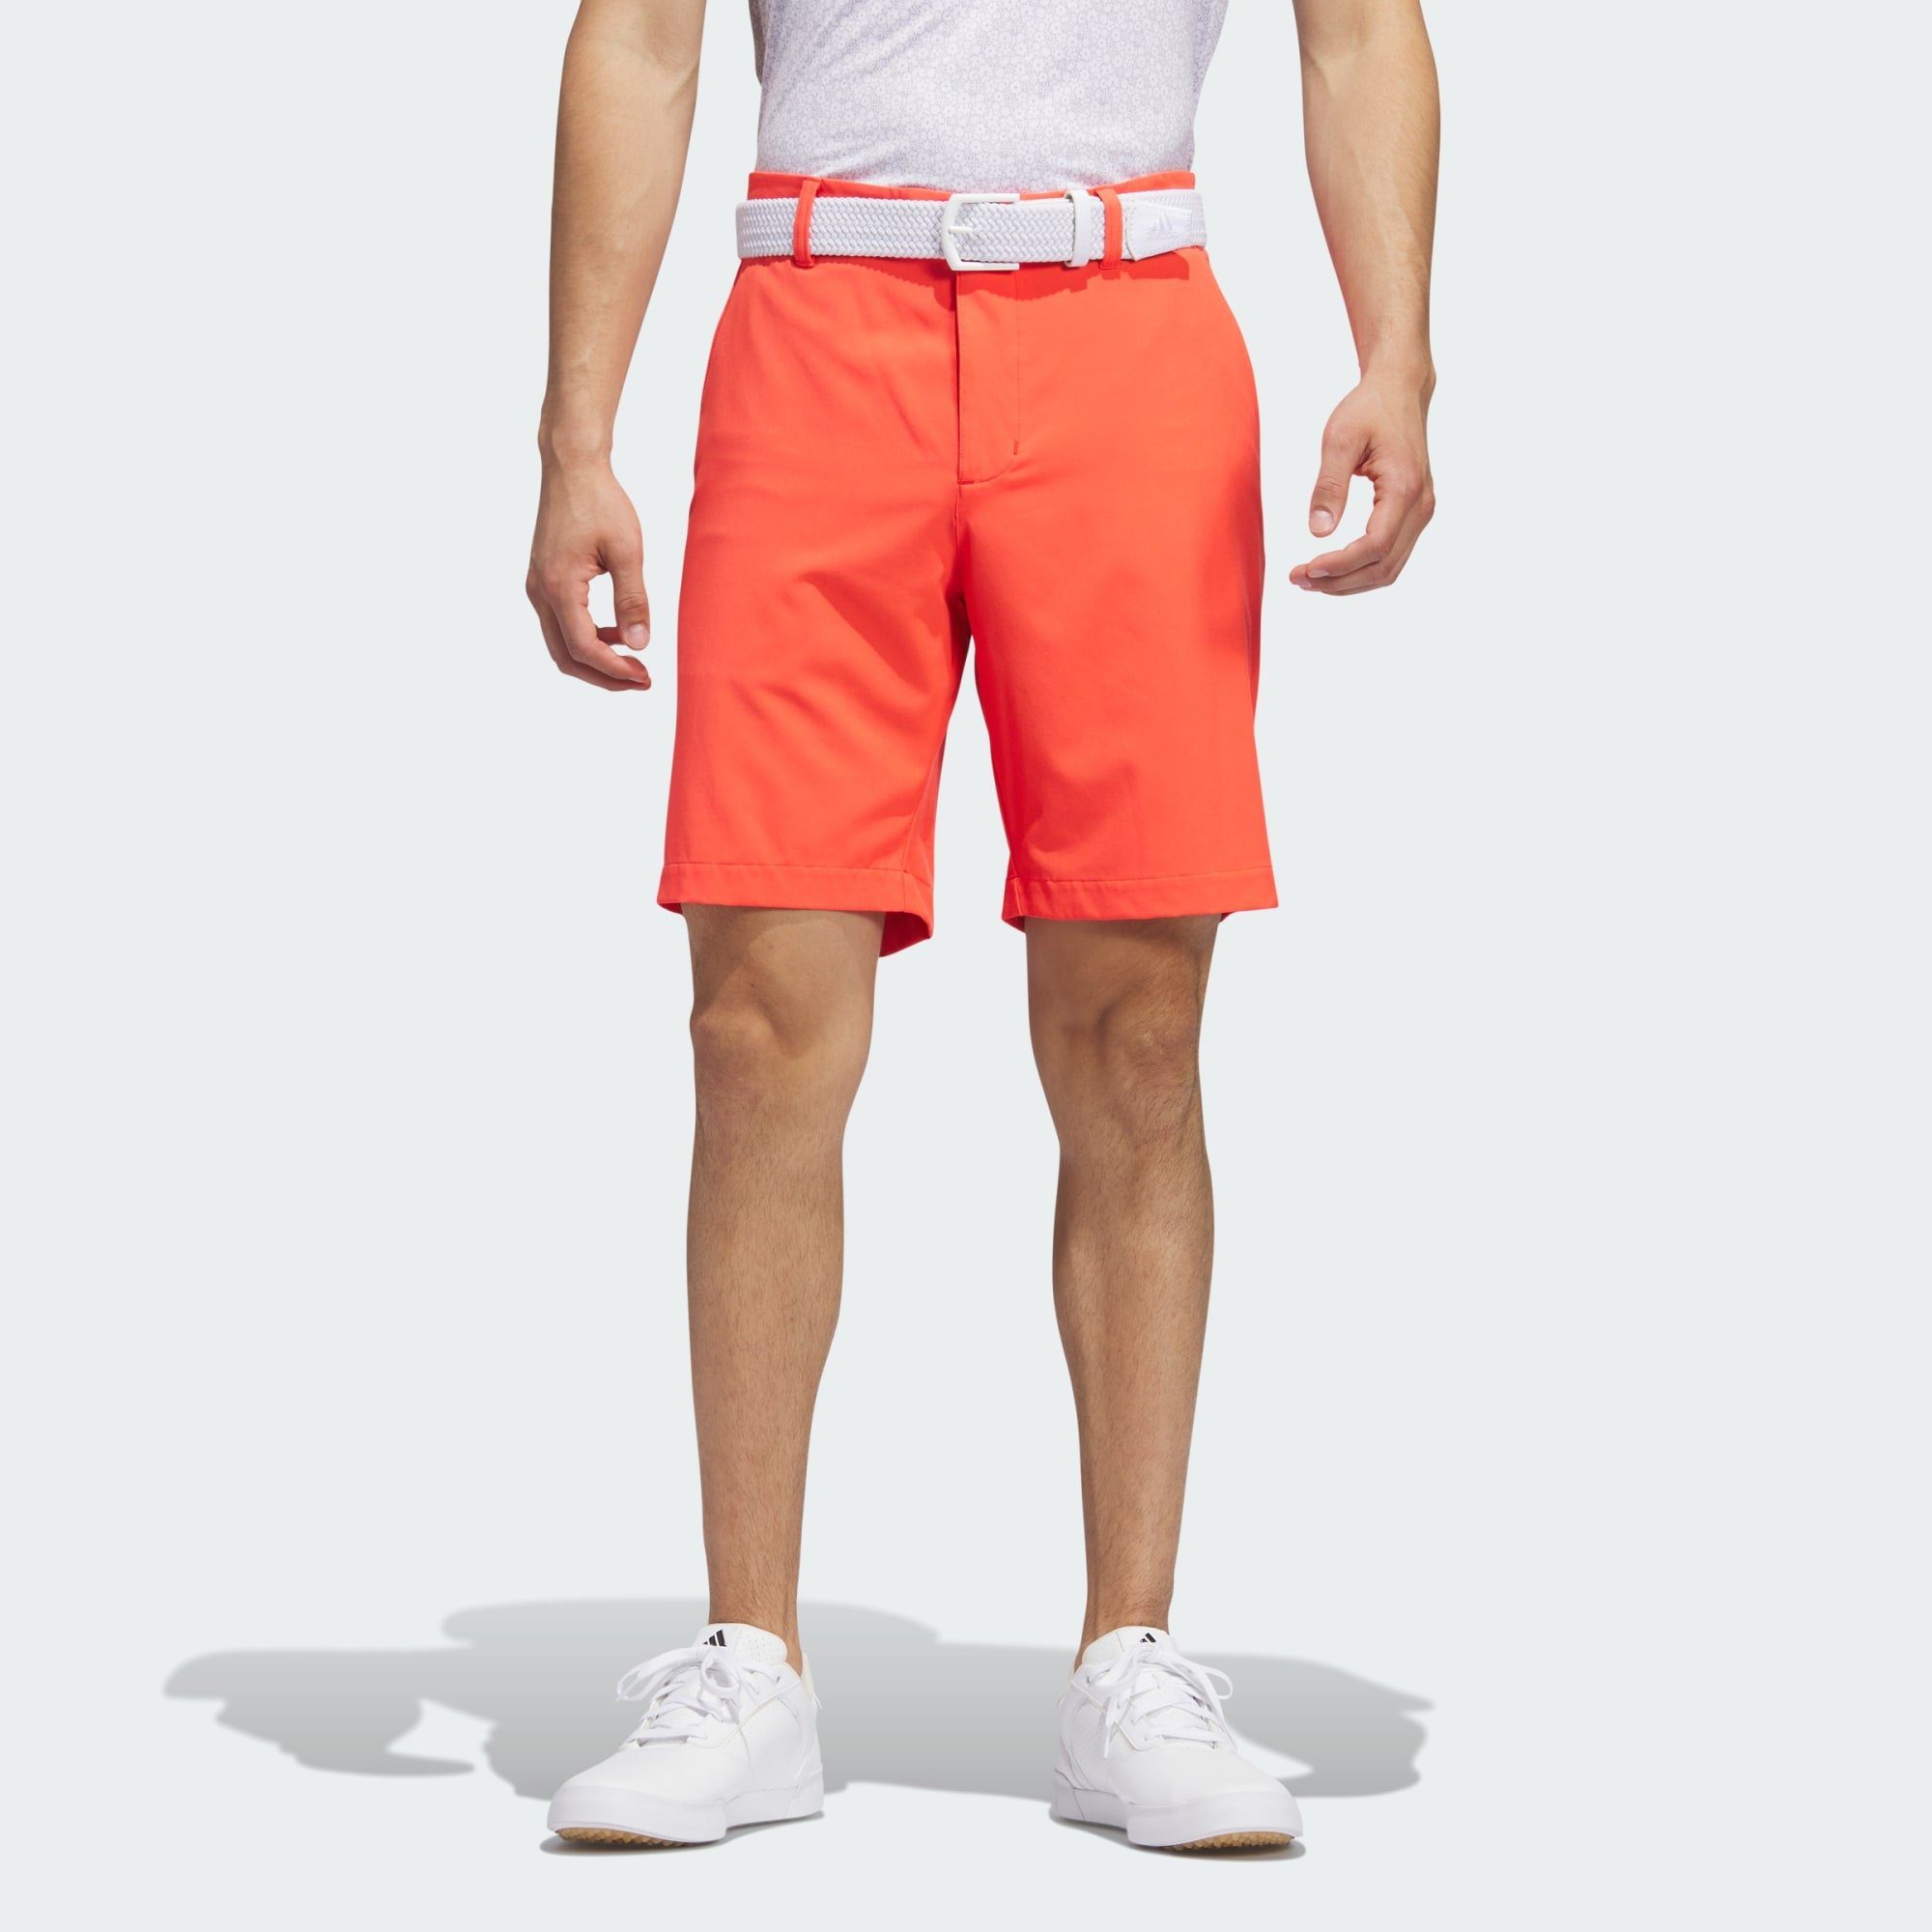 adidas Red GOLF Funktionsshorts Performance 8.5-INCH SHORTS Bright ULTIMATE365